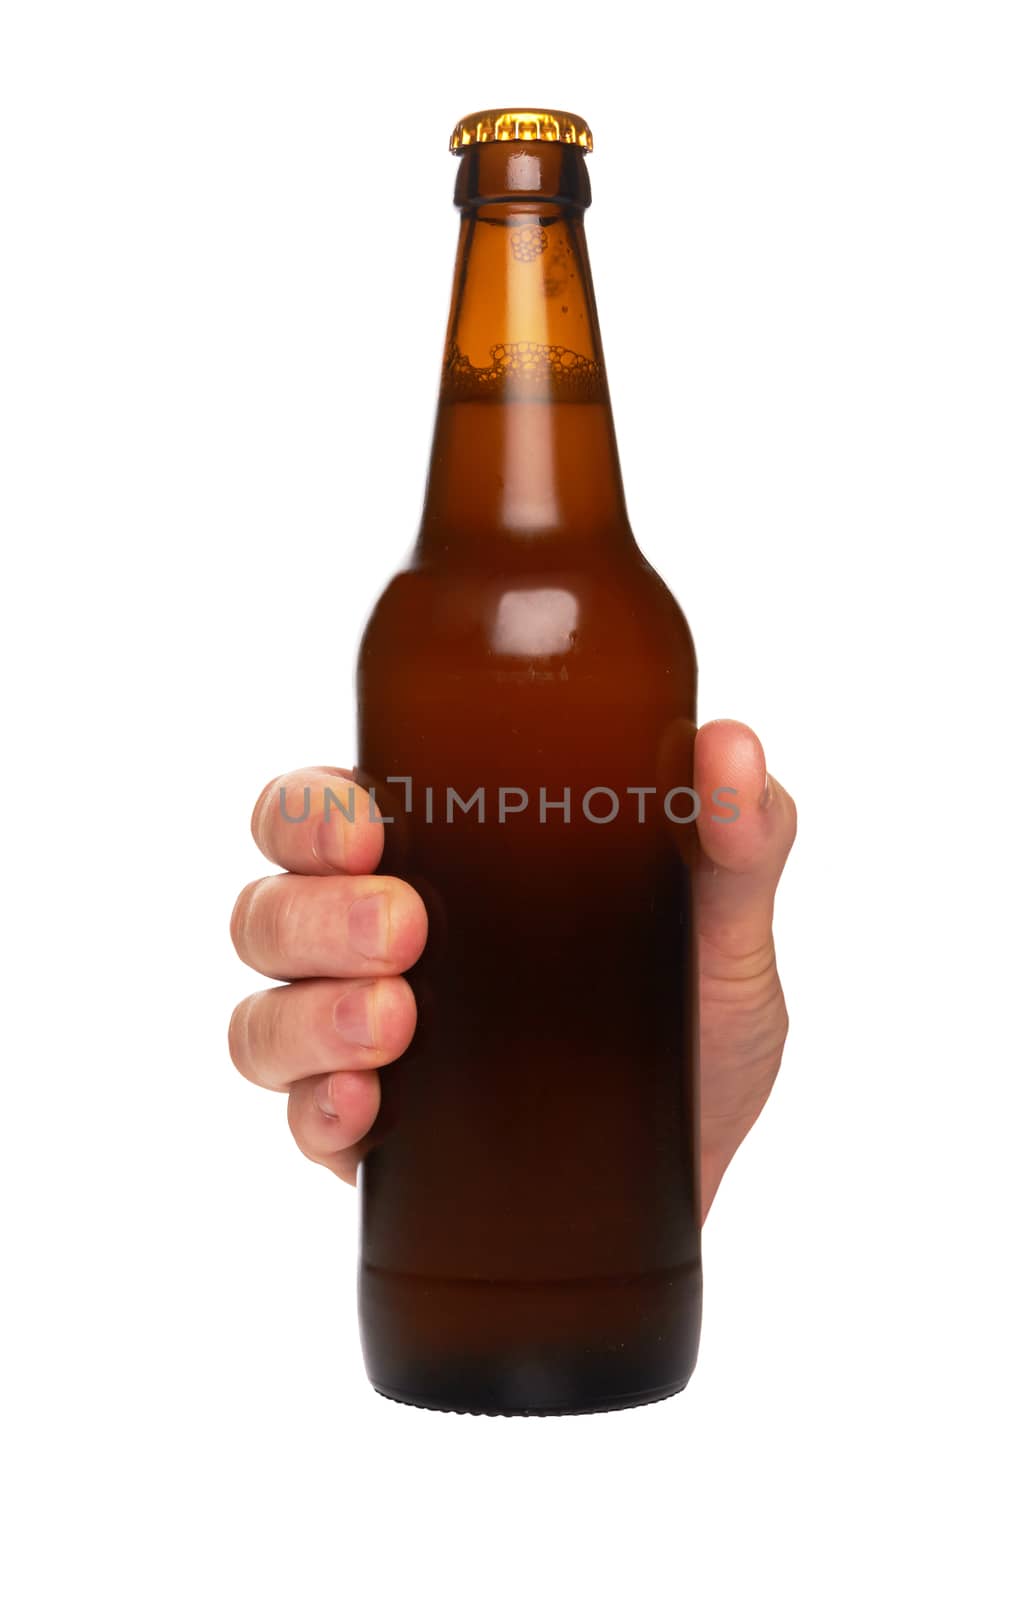 hand holding a beer bottle without label isolated on white background